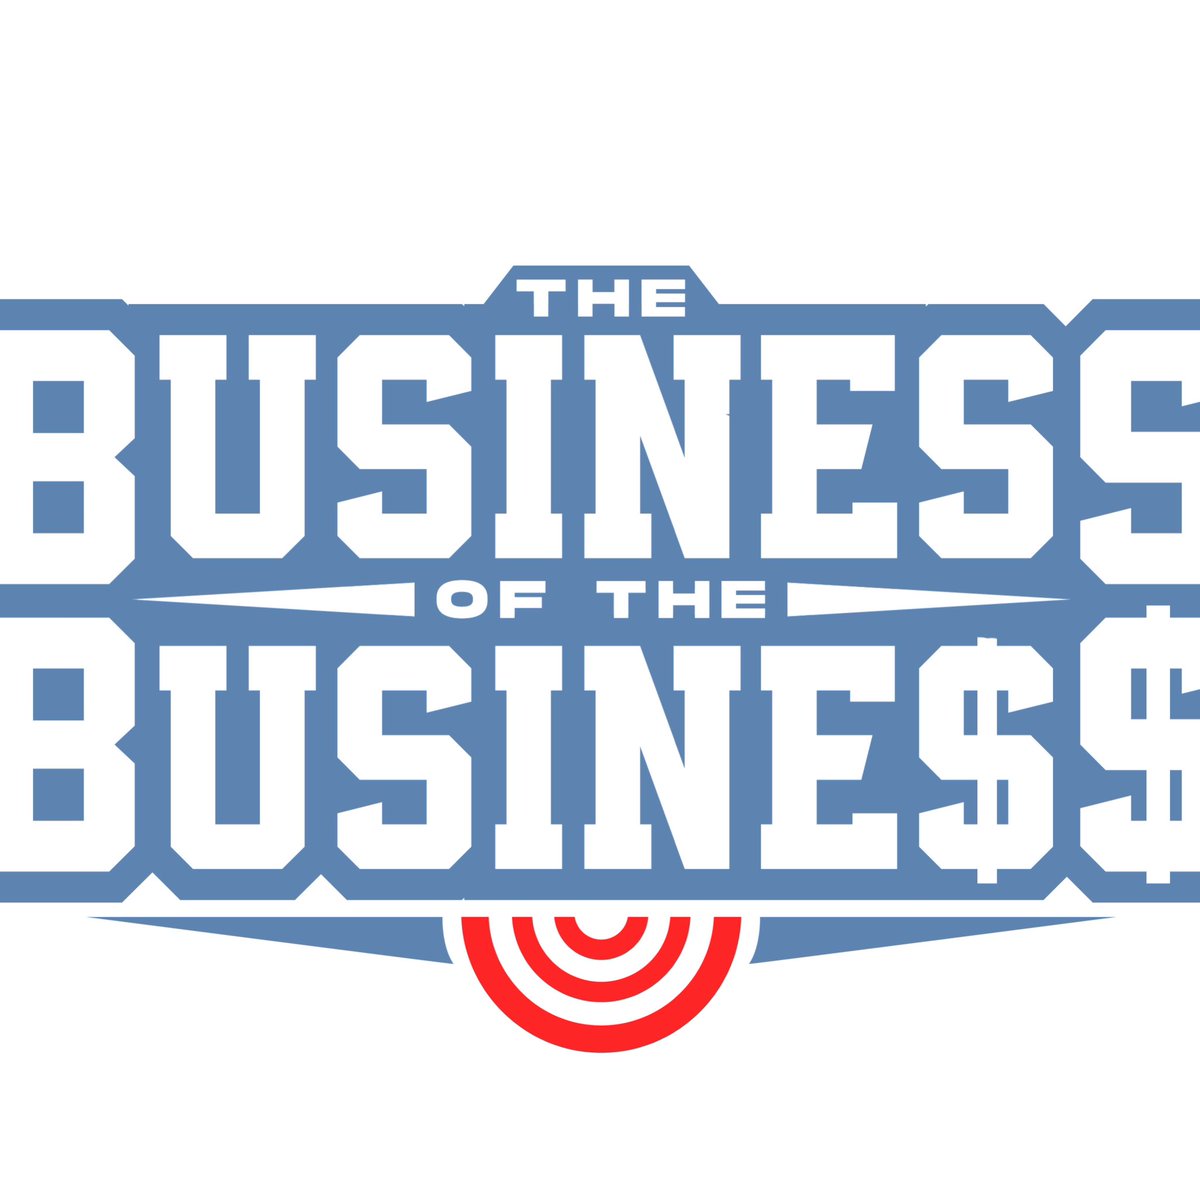 The Business of the Business @LavieMarg
@theccnetwork1 @jffeeney3rd Episode 181 talking #WWE #AEW #NJPW #TNA #MLW #WOW #Aaa #cmll & more!

spreaker.com/episode/episod…